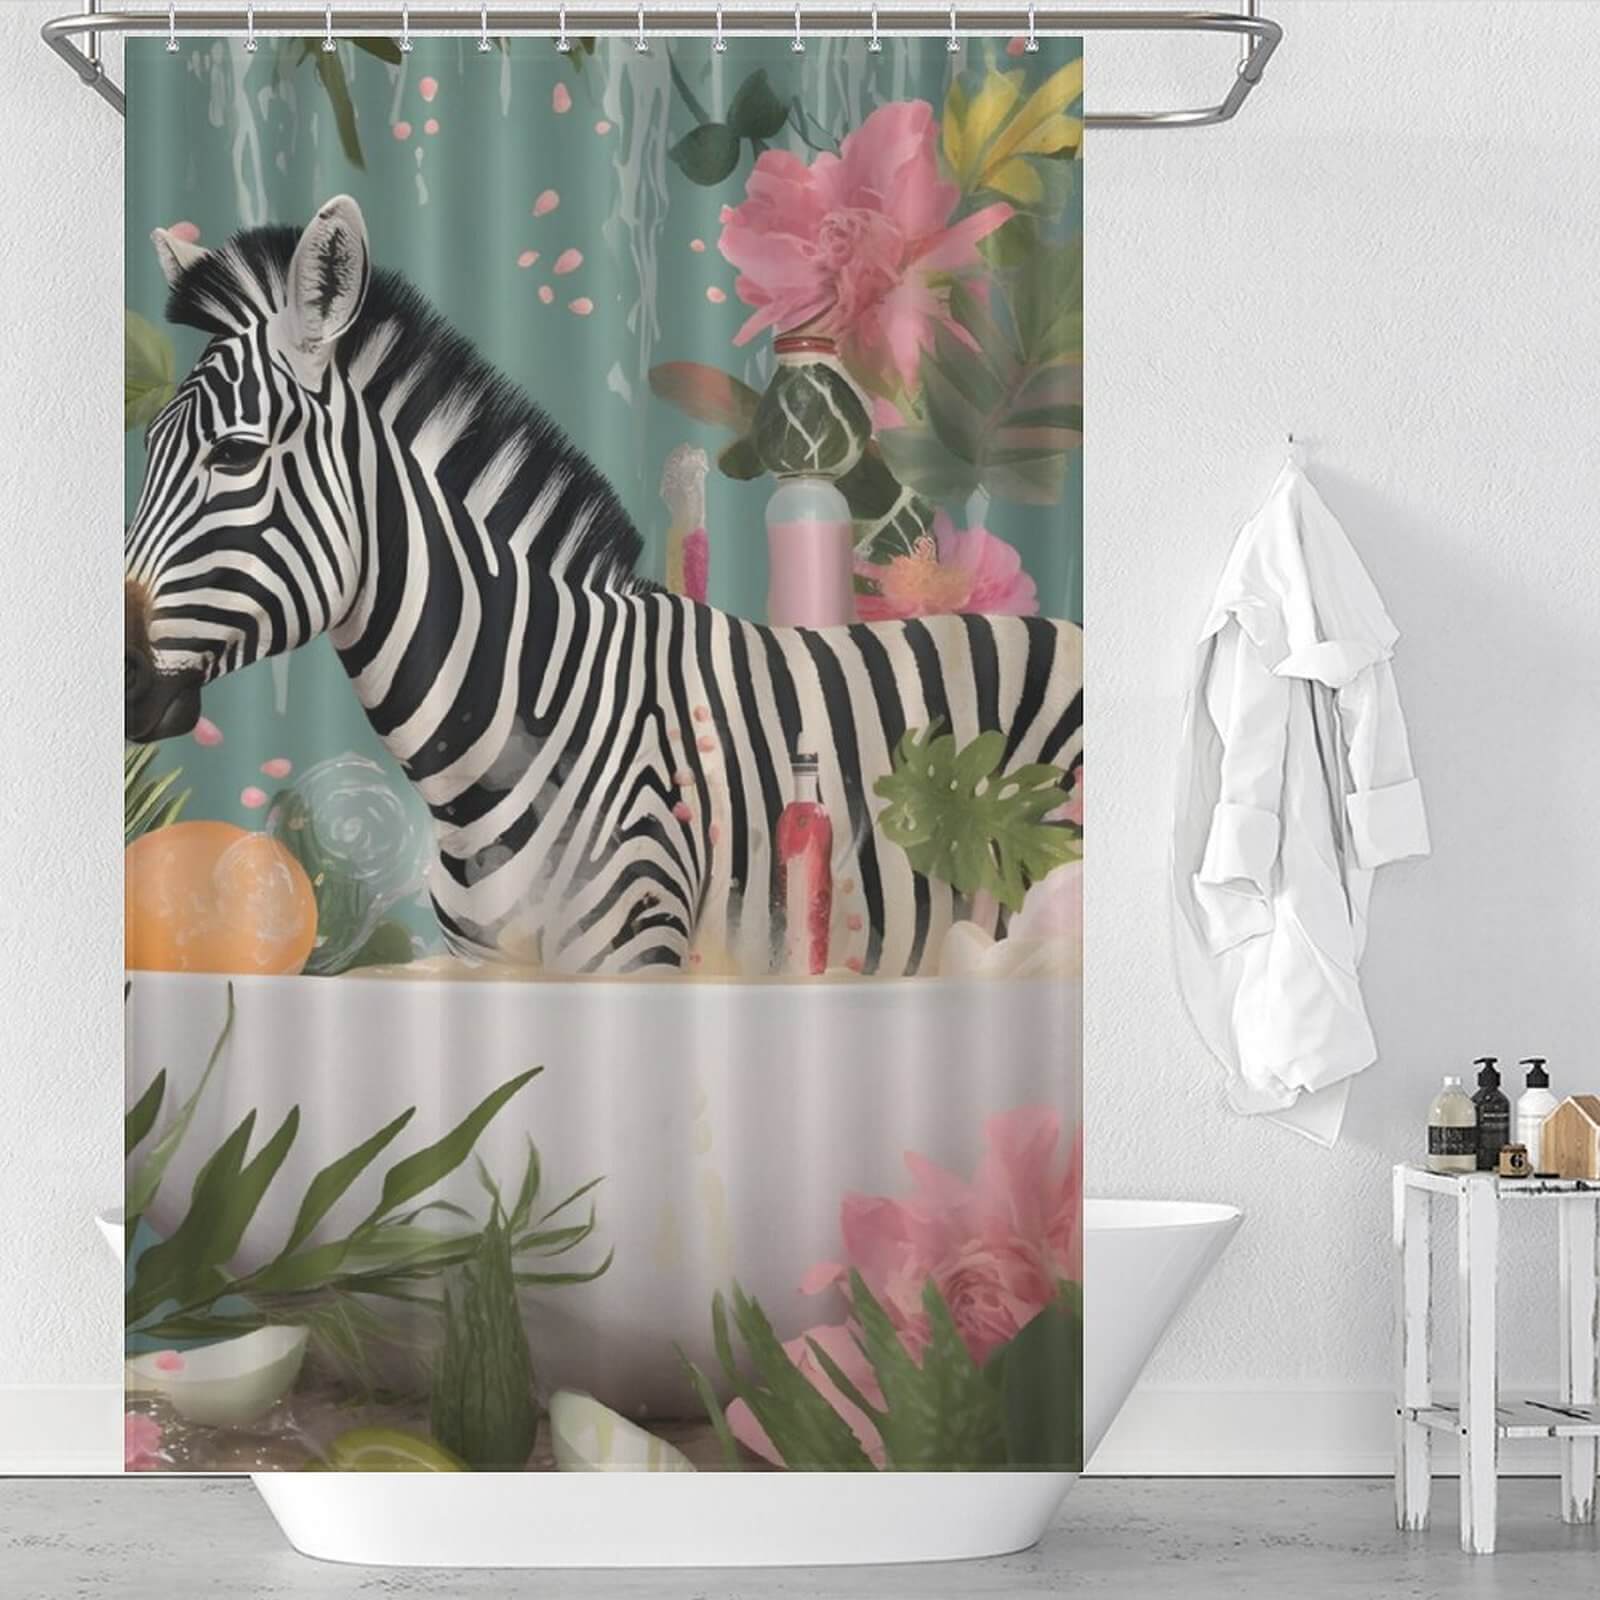 Enhance your bathroom with a Waterproof Zebra In Bathtub Shower Curtain by Cotton Cat, featuring elegant flowers, designed to bring a touch of safari-inspired style to your decor.